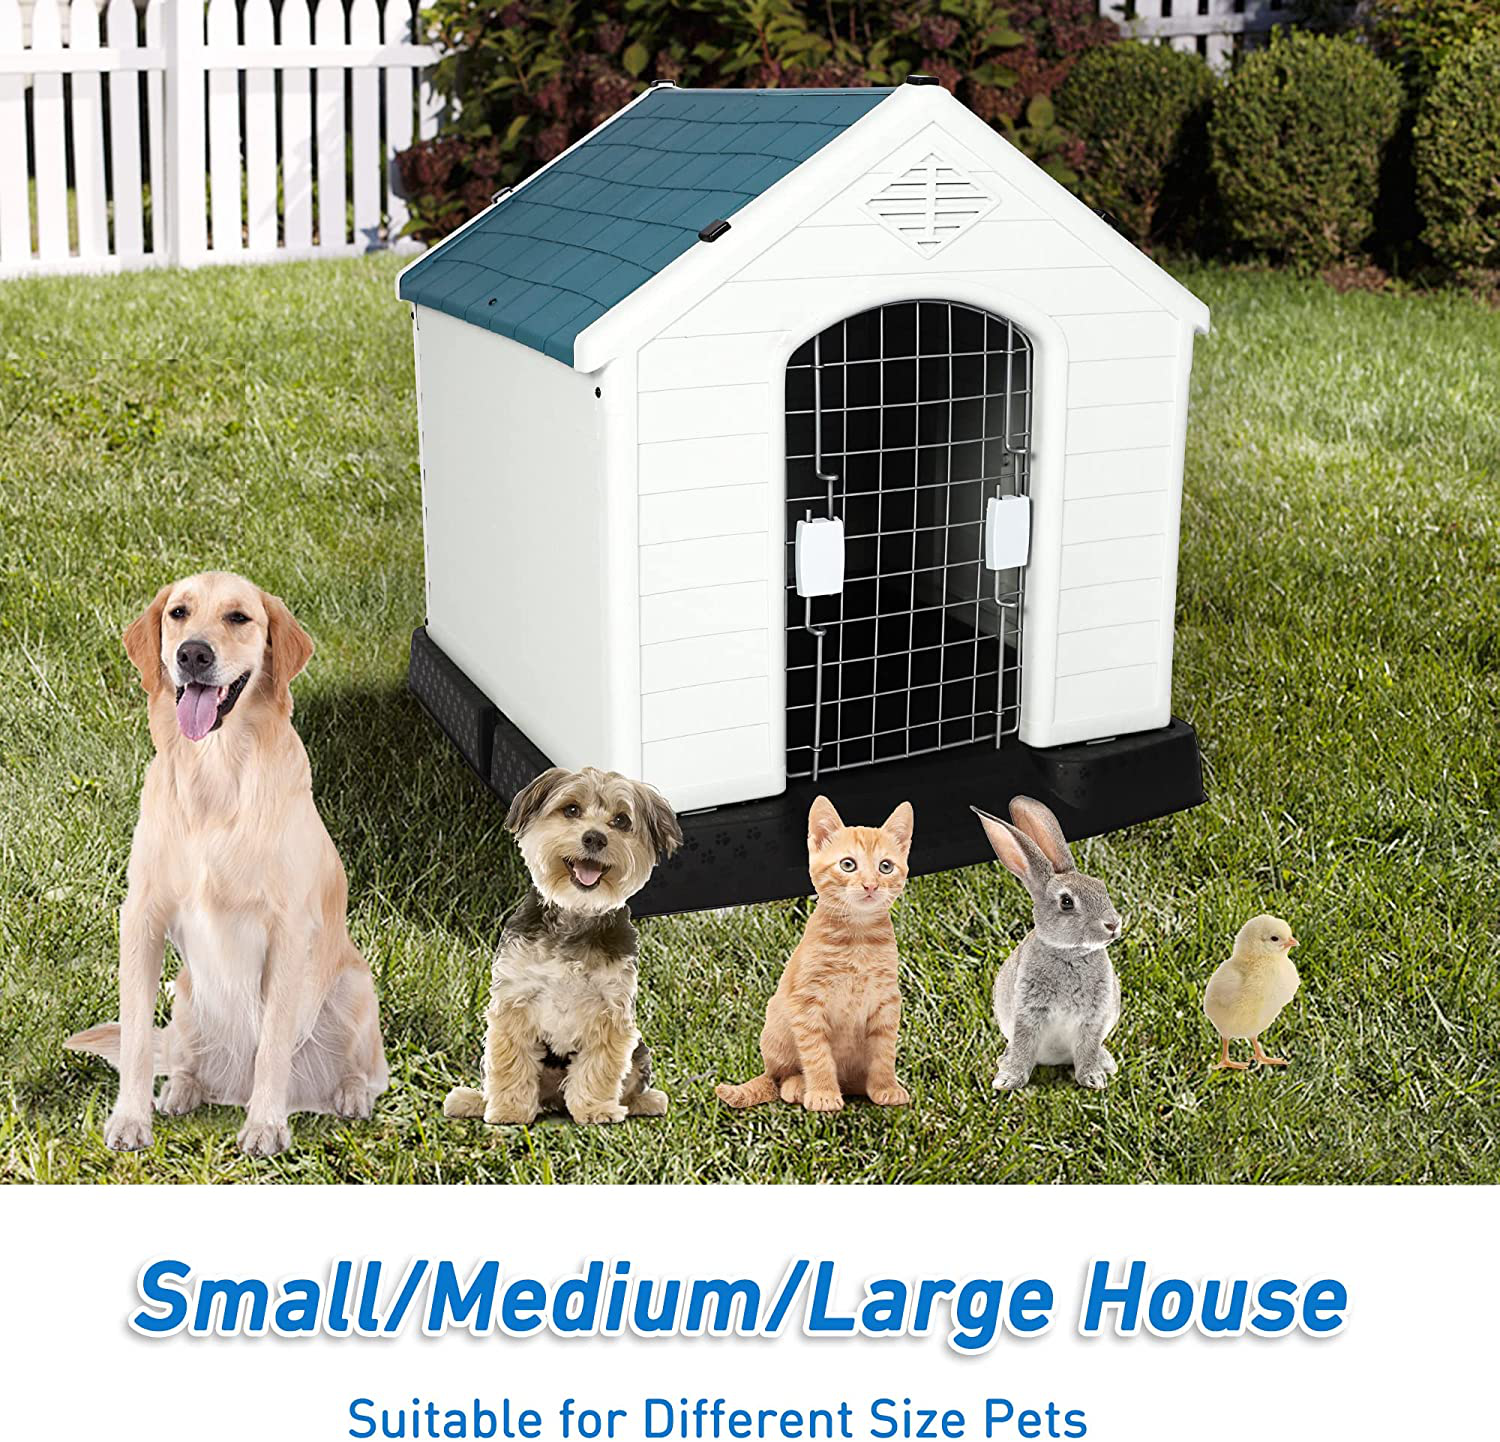 LUCKYERMORE Outdoor Dog House with Door for Small Medium Large Dogs Waterproof Puppy Kennel Plastic outside Pet Crate with Gate for All Weather, 28" H/32 H/39 H